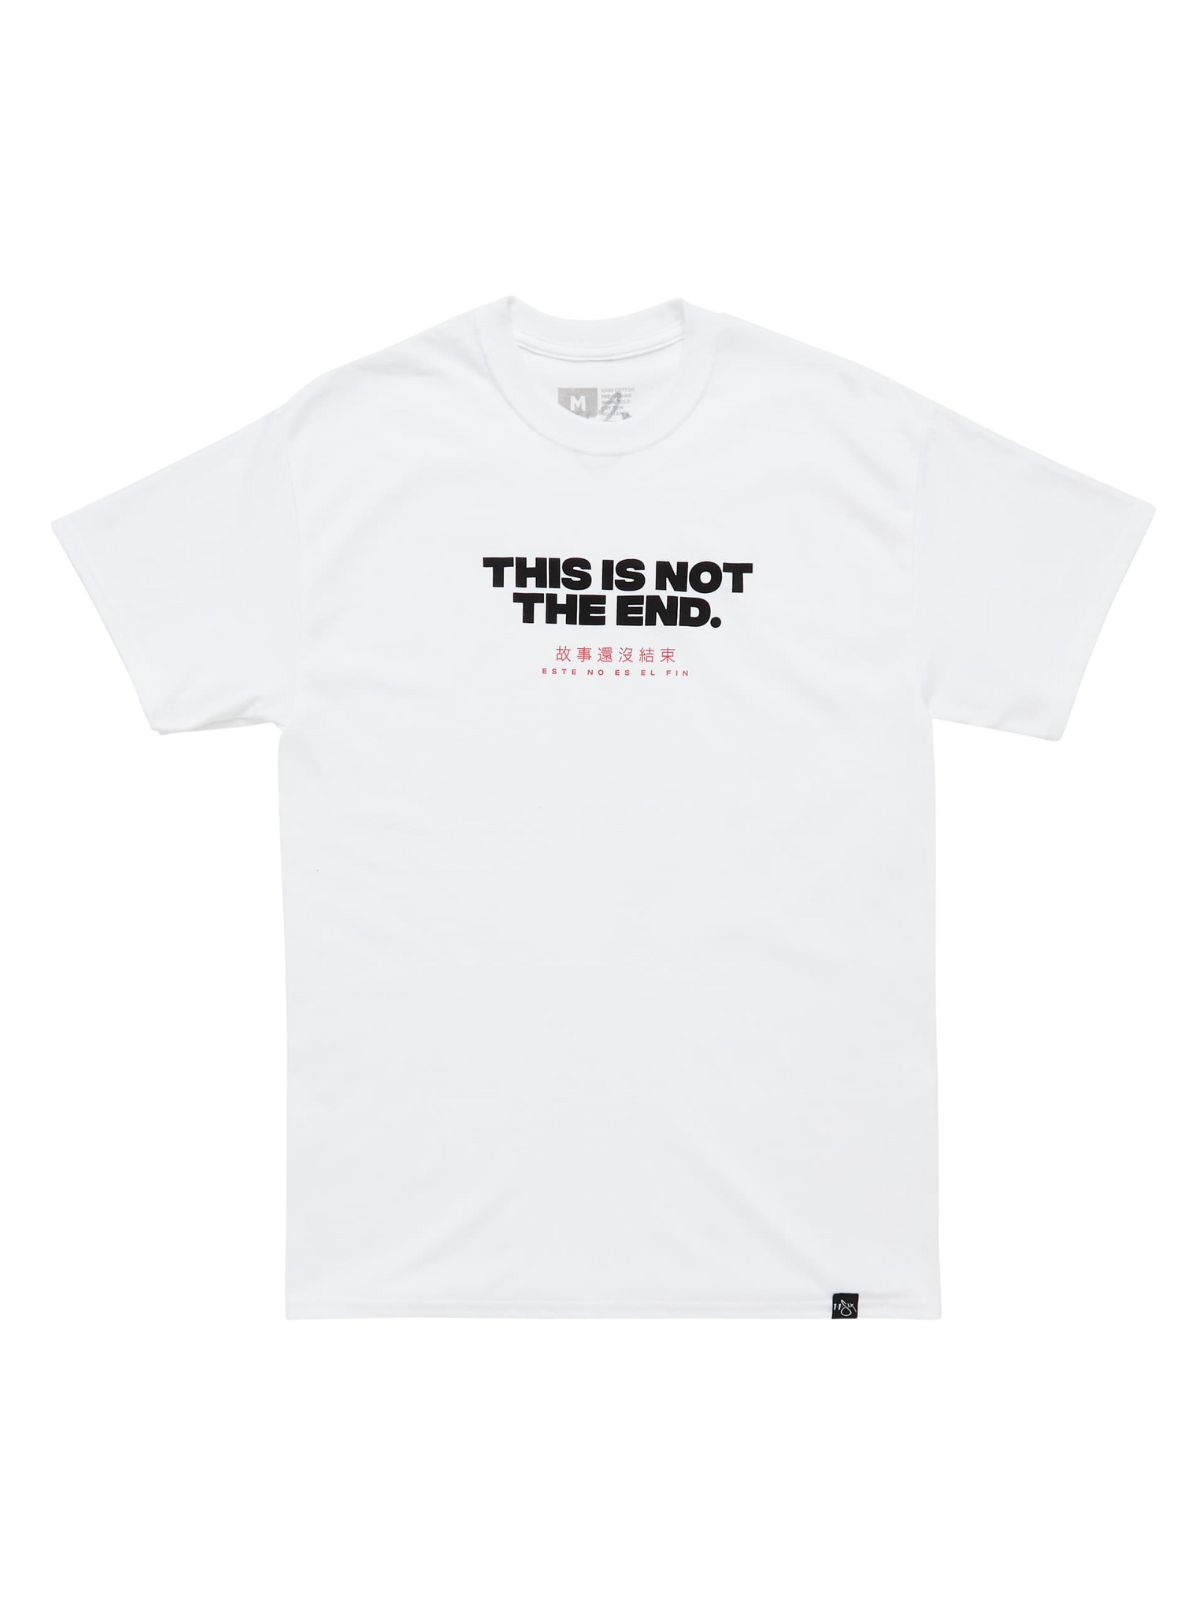 Not The End Tee - White